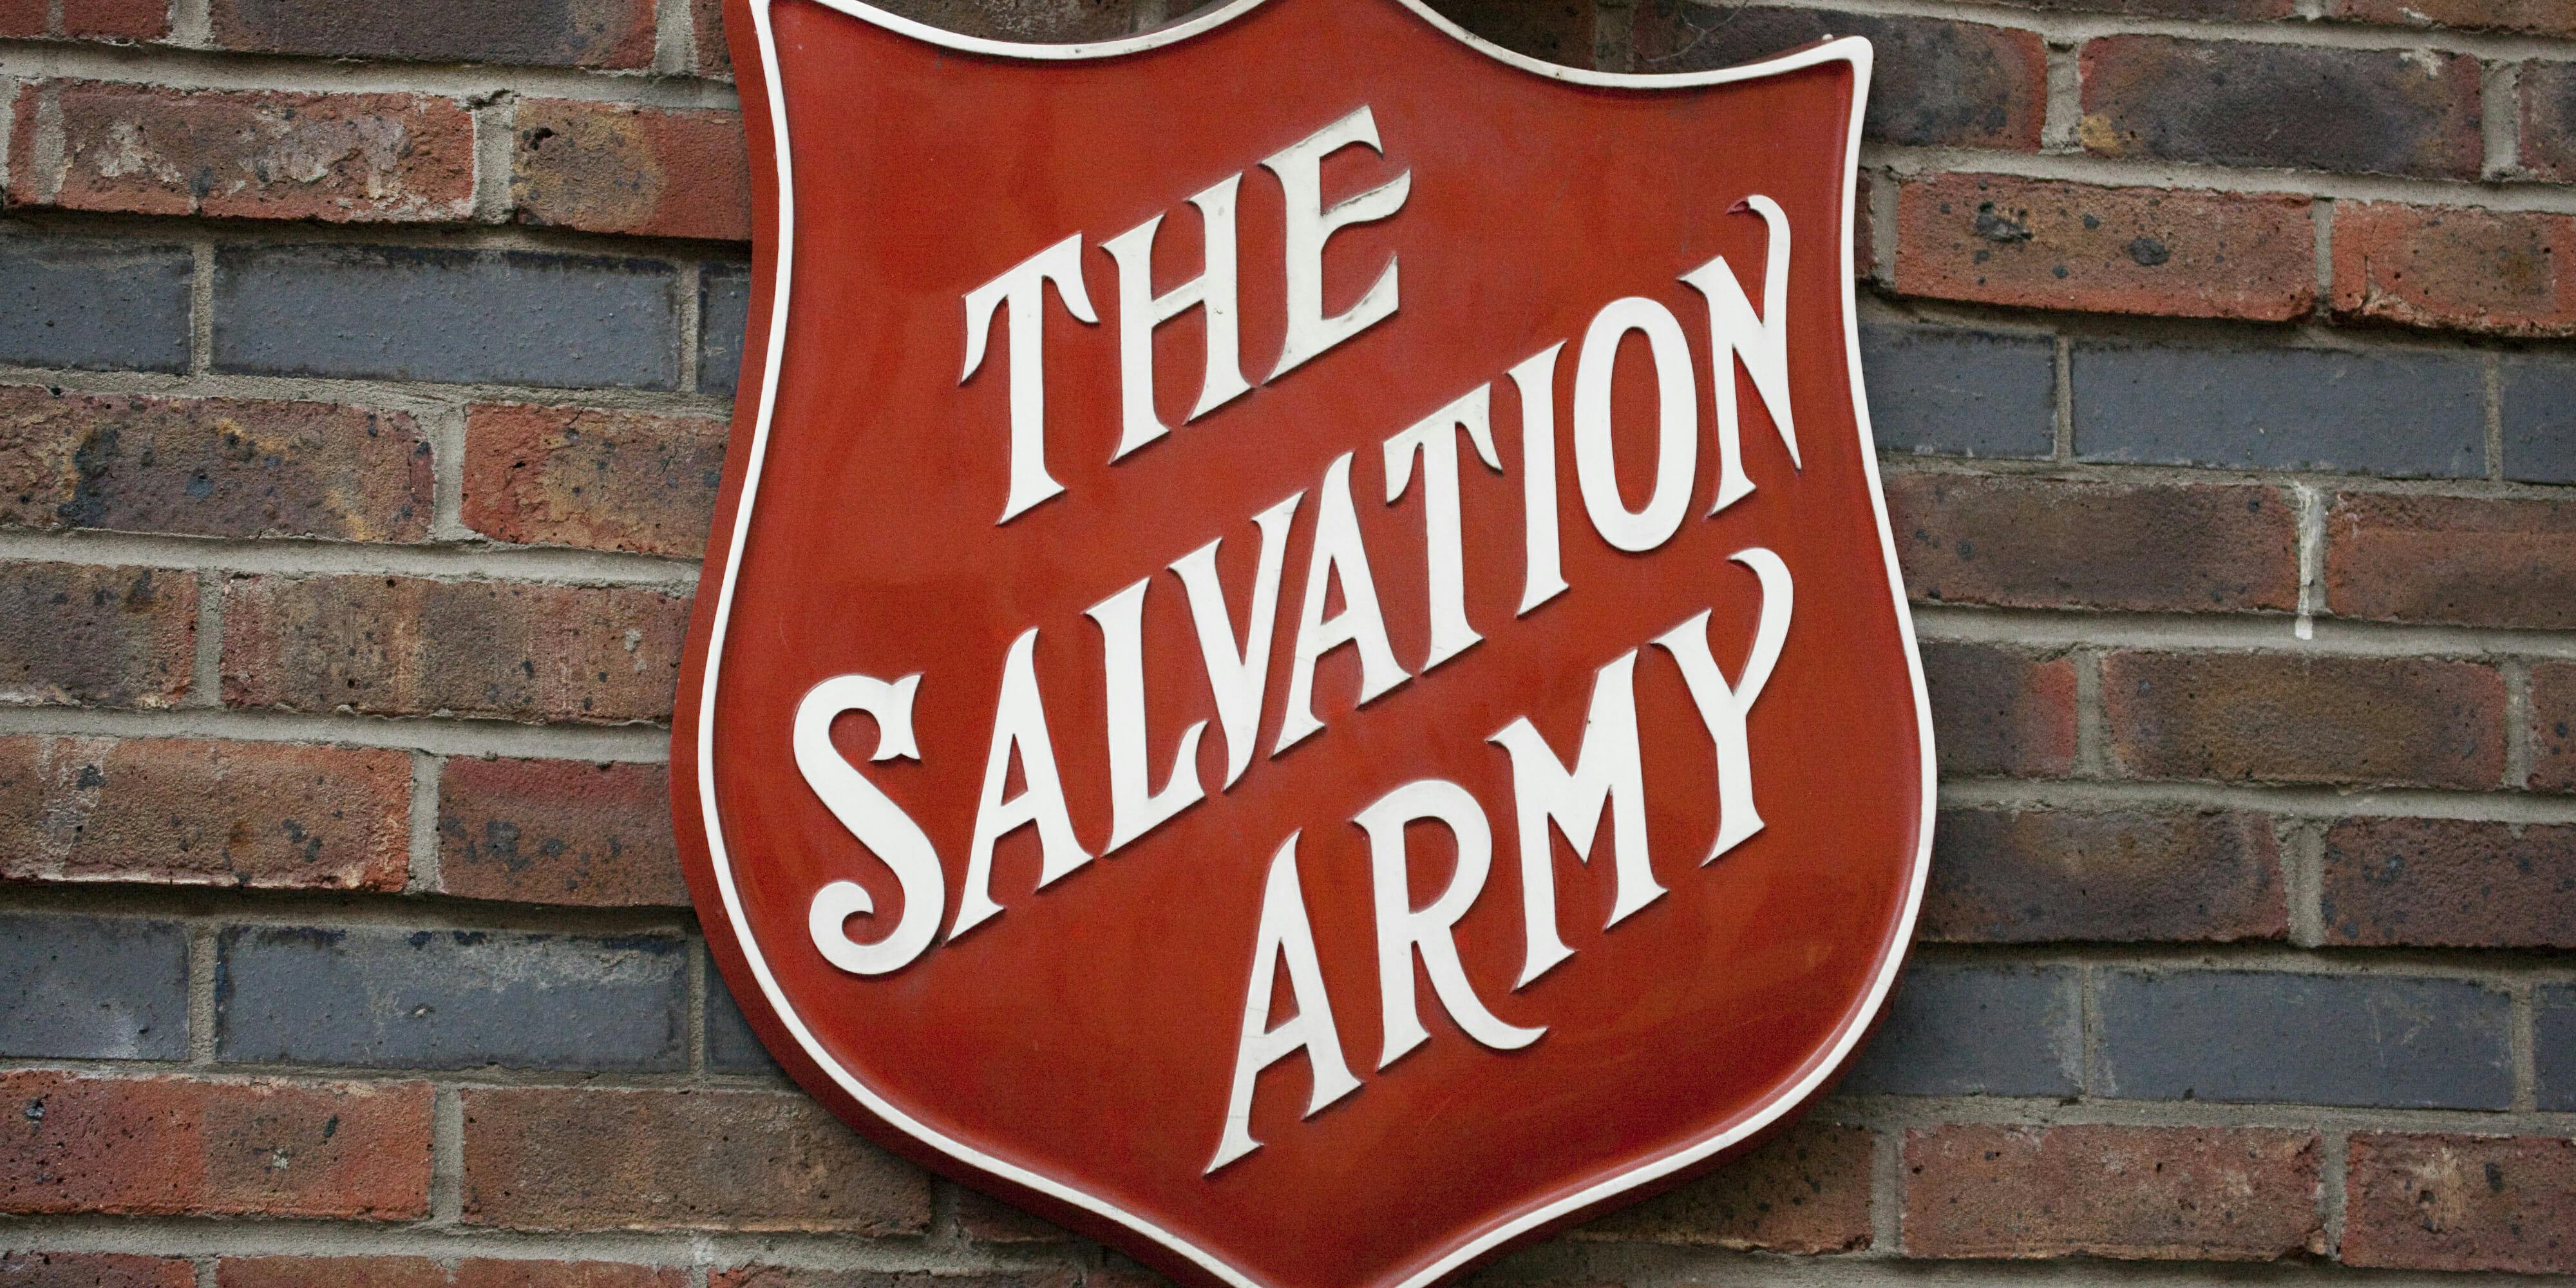 Nyc Salvation Army Center Caught Discriminating Against Transgender